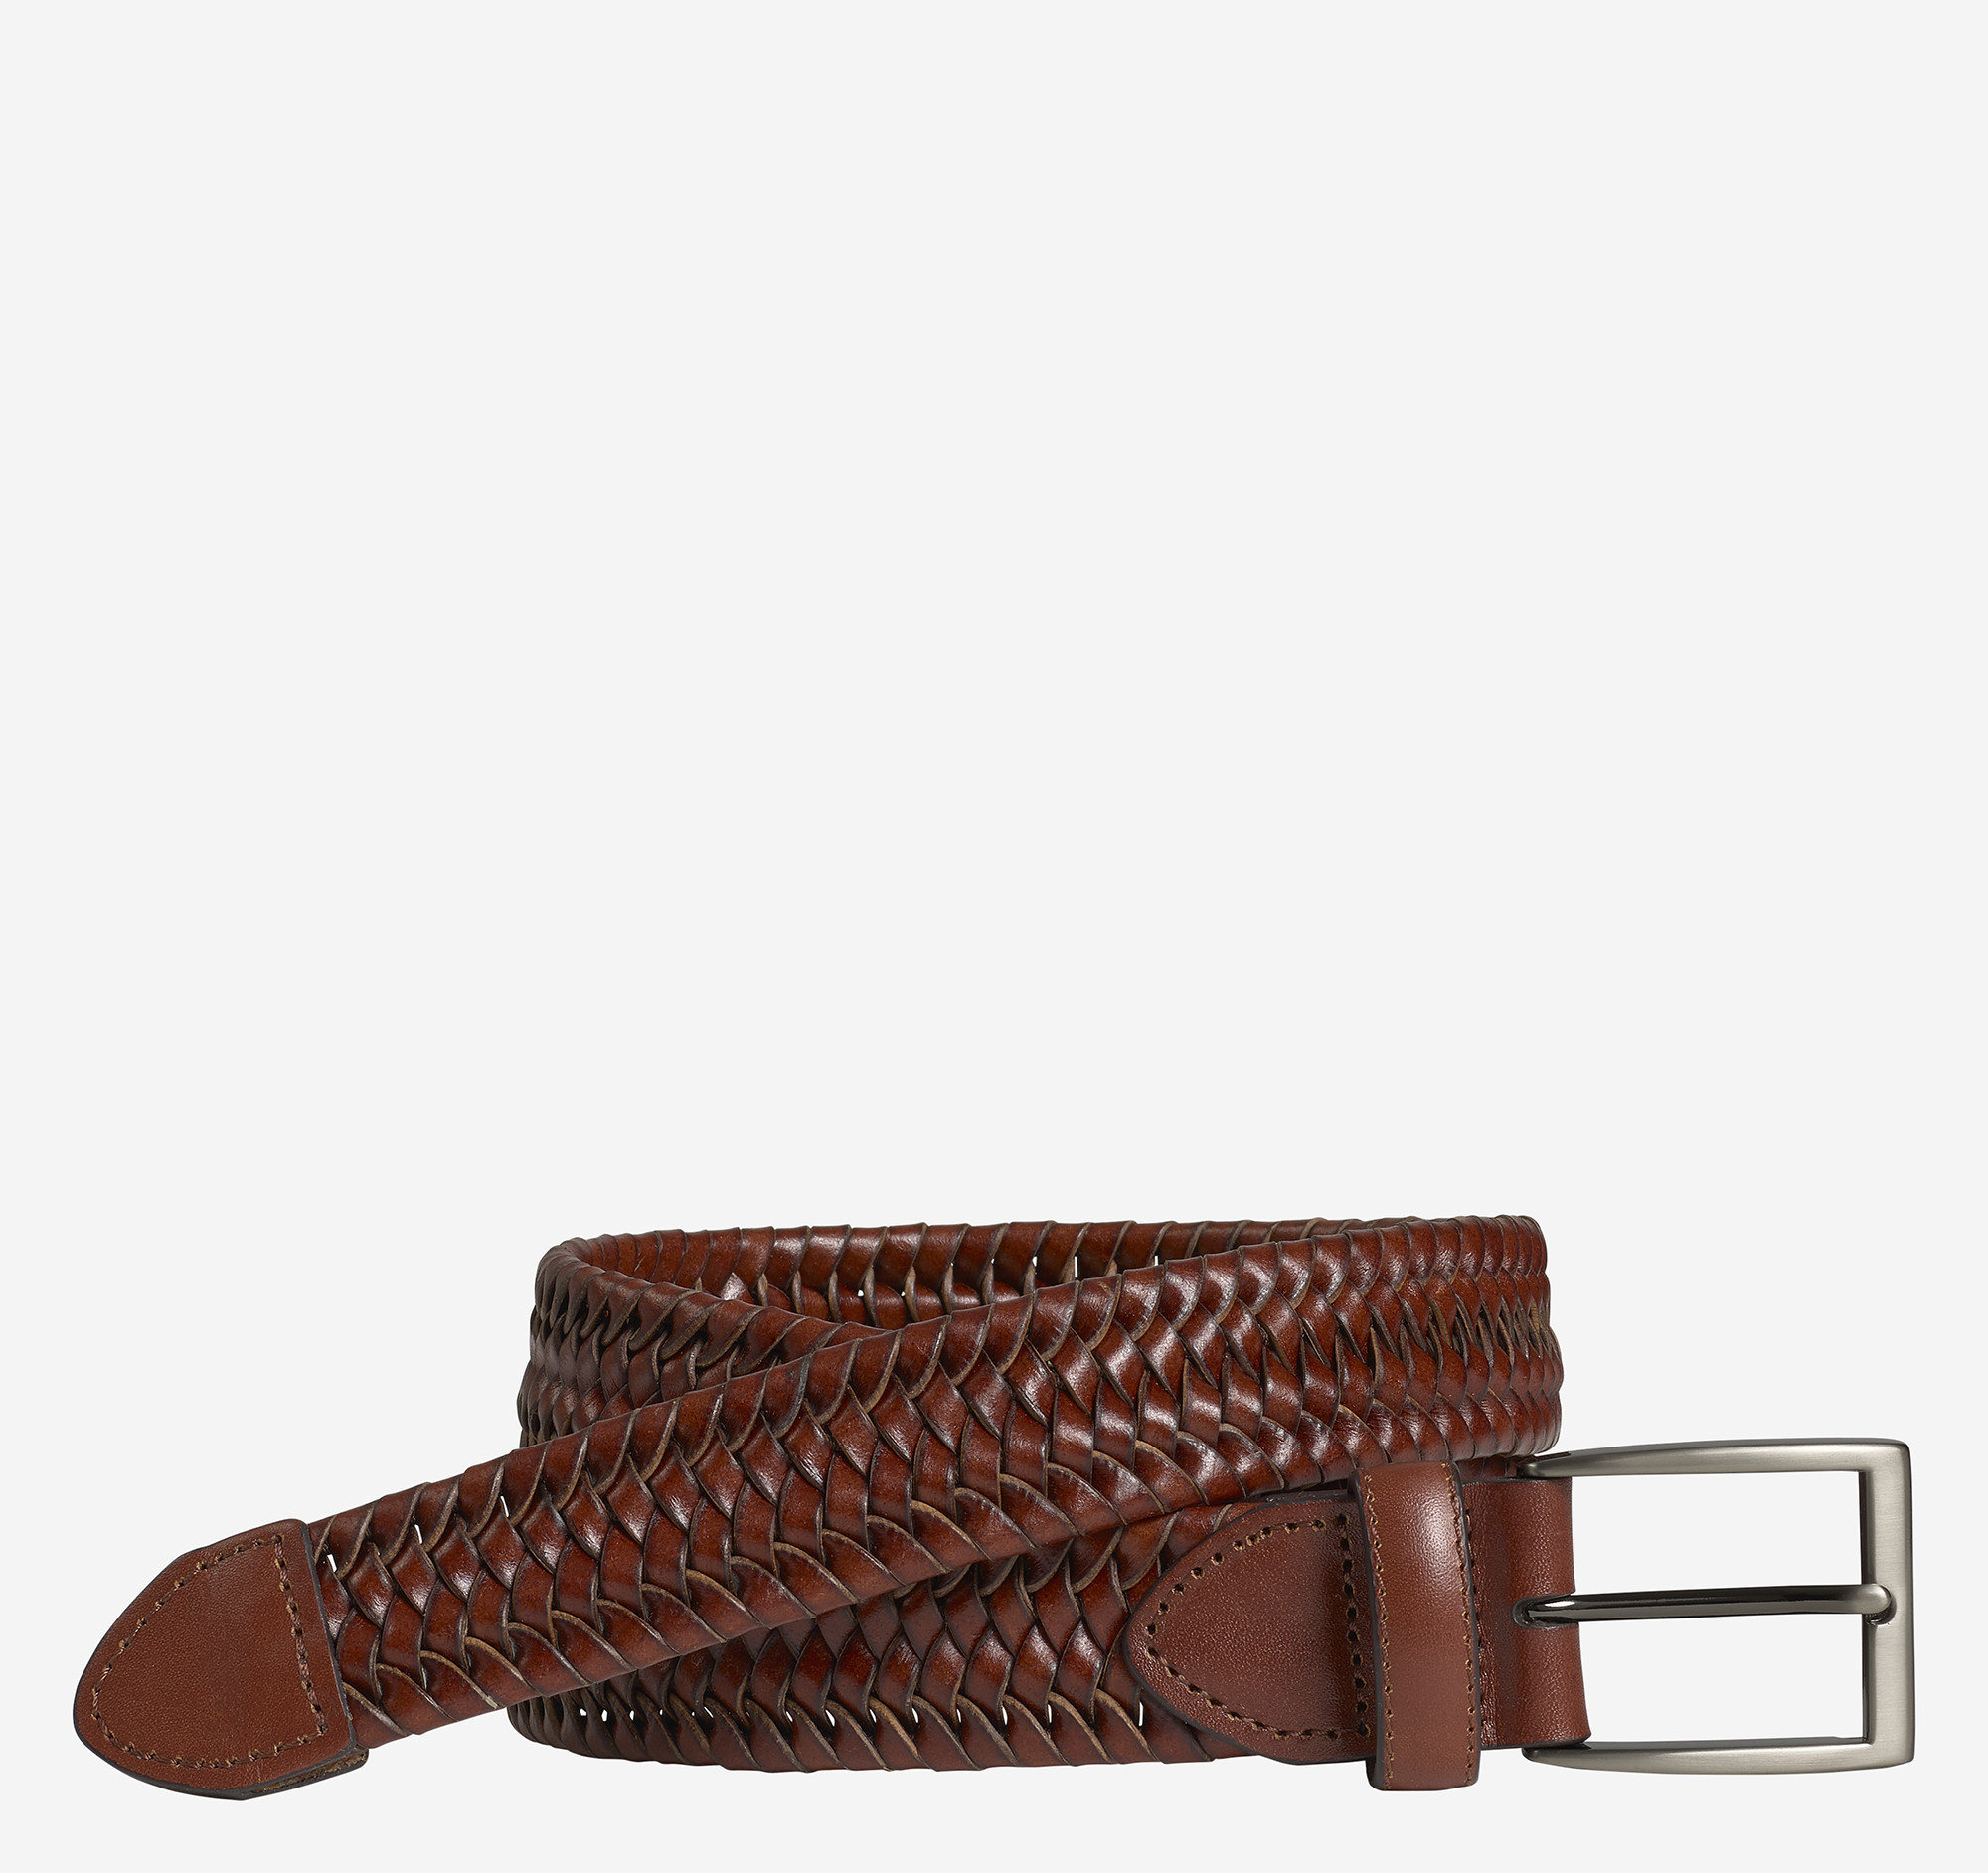 Stretchy Leather Belt Discounted Buying | clc.cet.edu